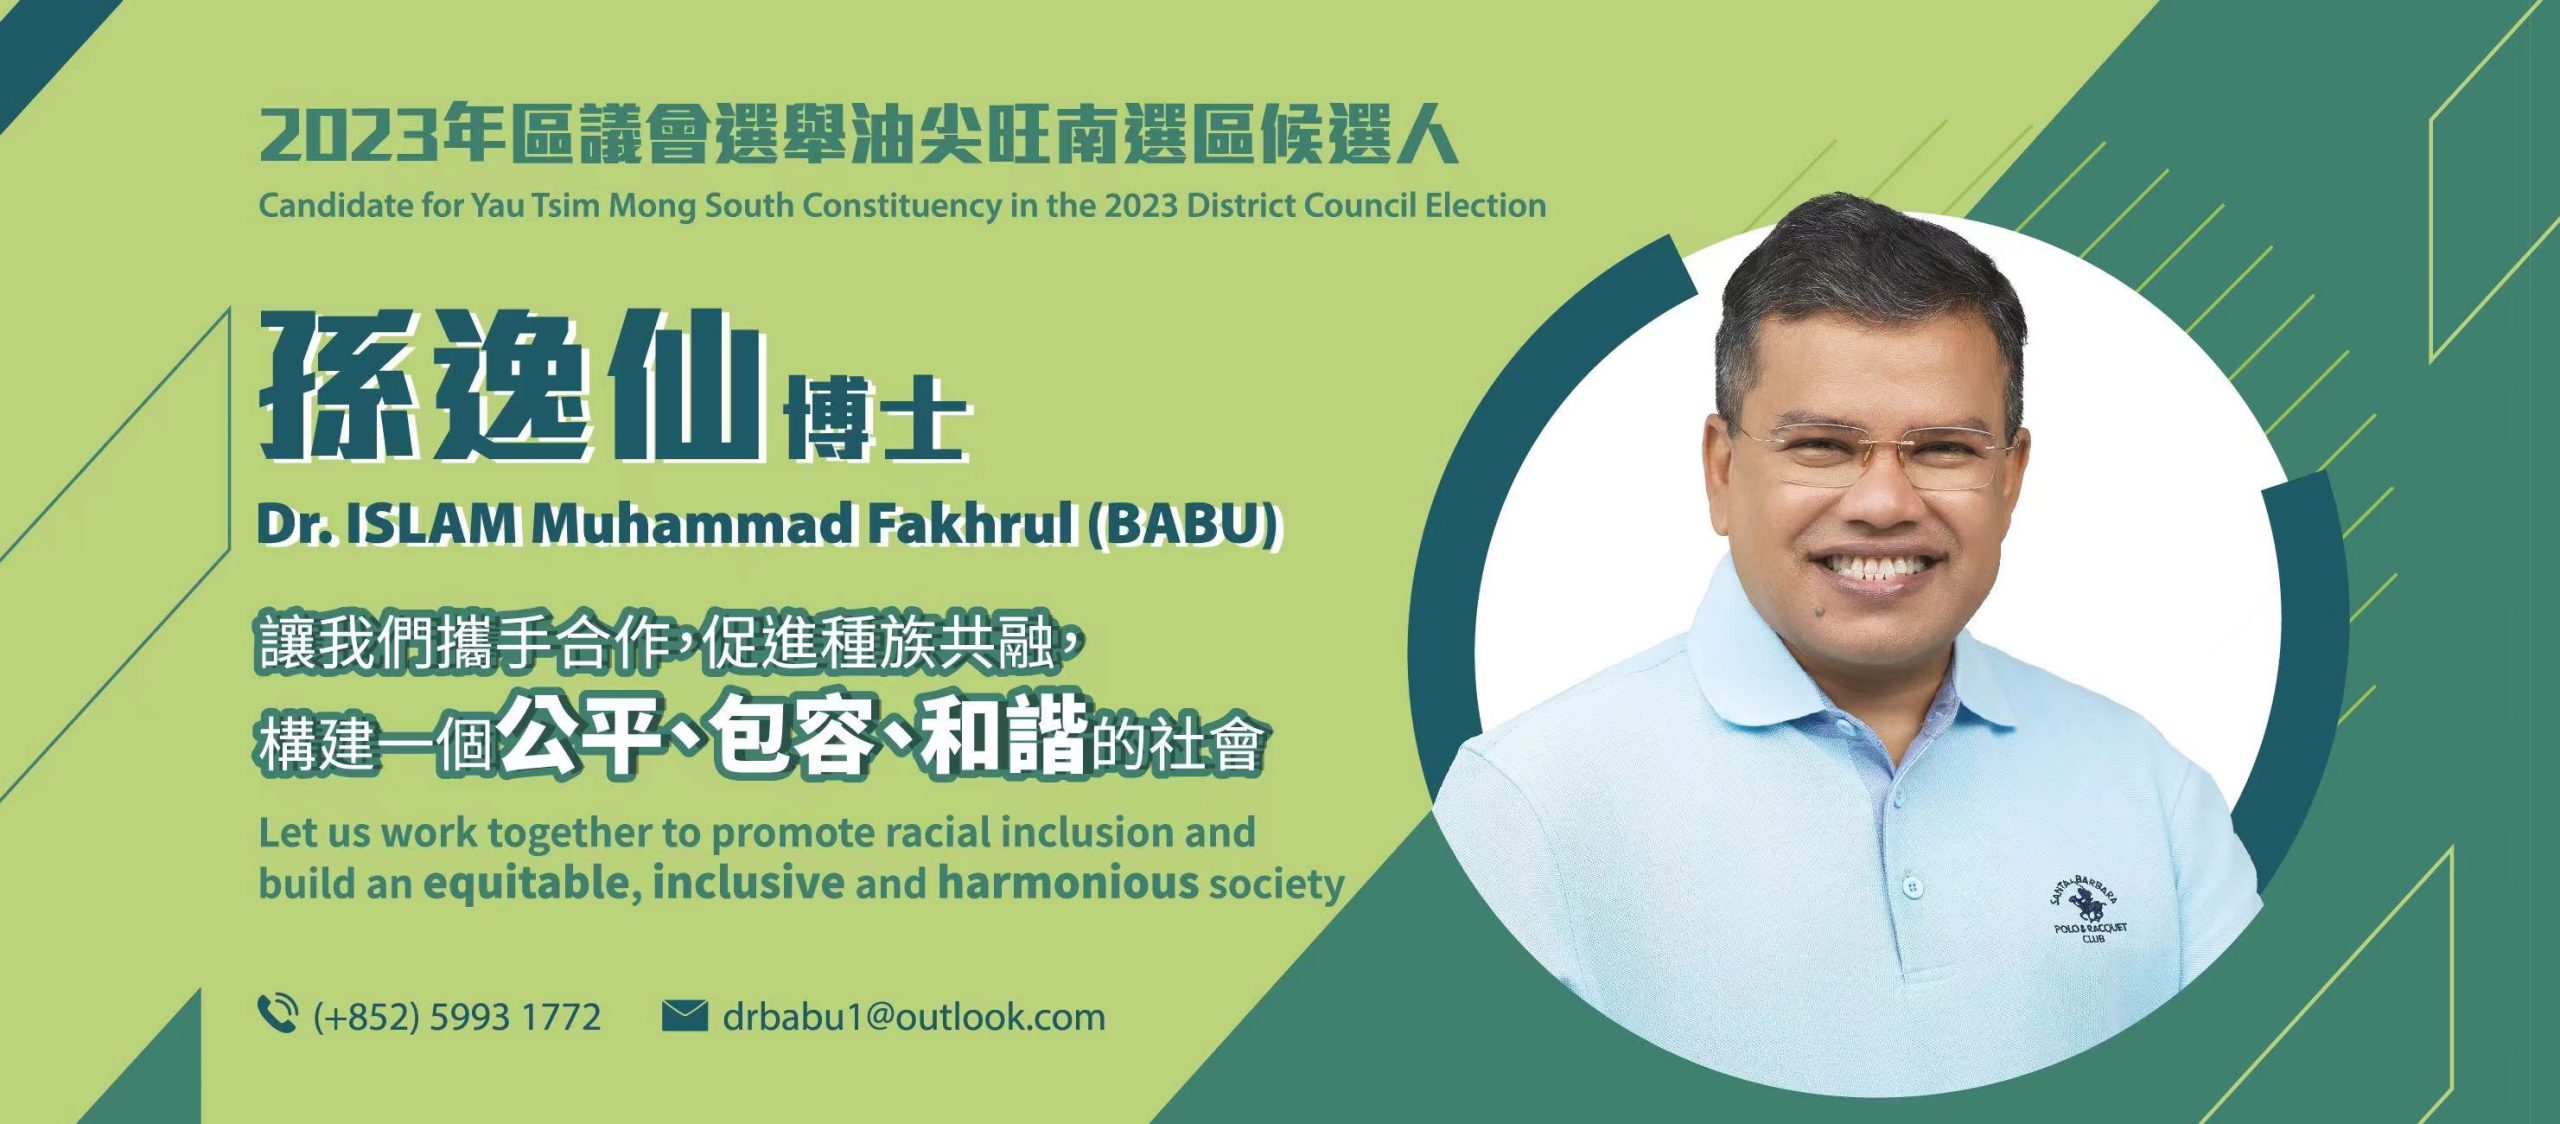 Dr Fakhrul Islam Babu 孫逸仙 is running for Hong Kong District Council Election